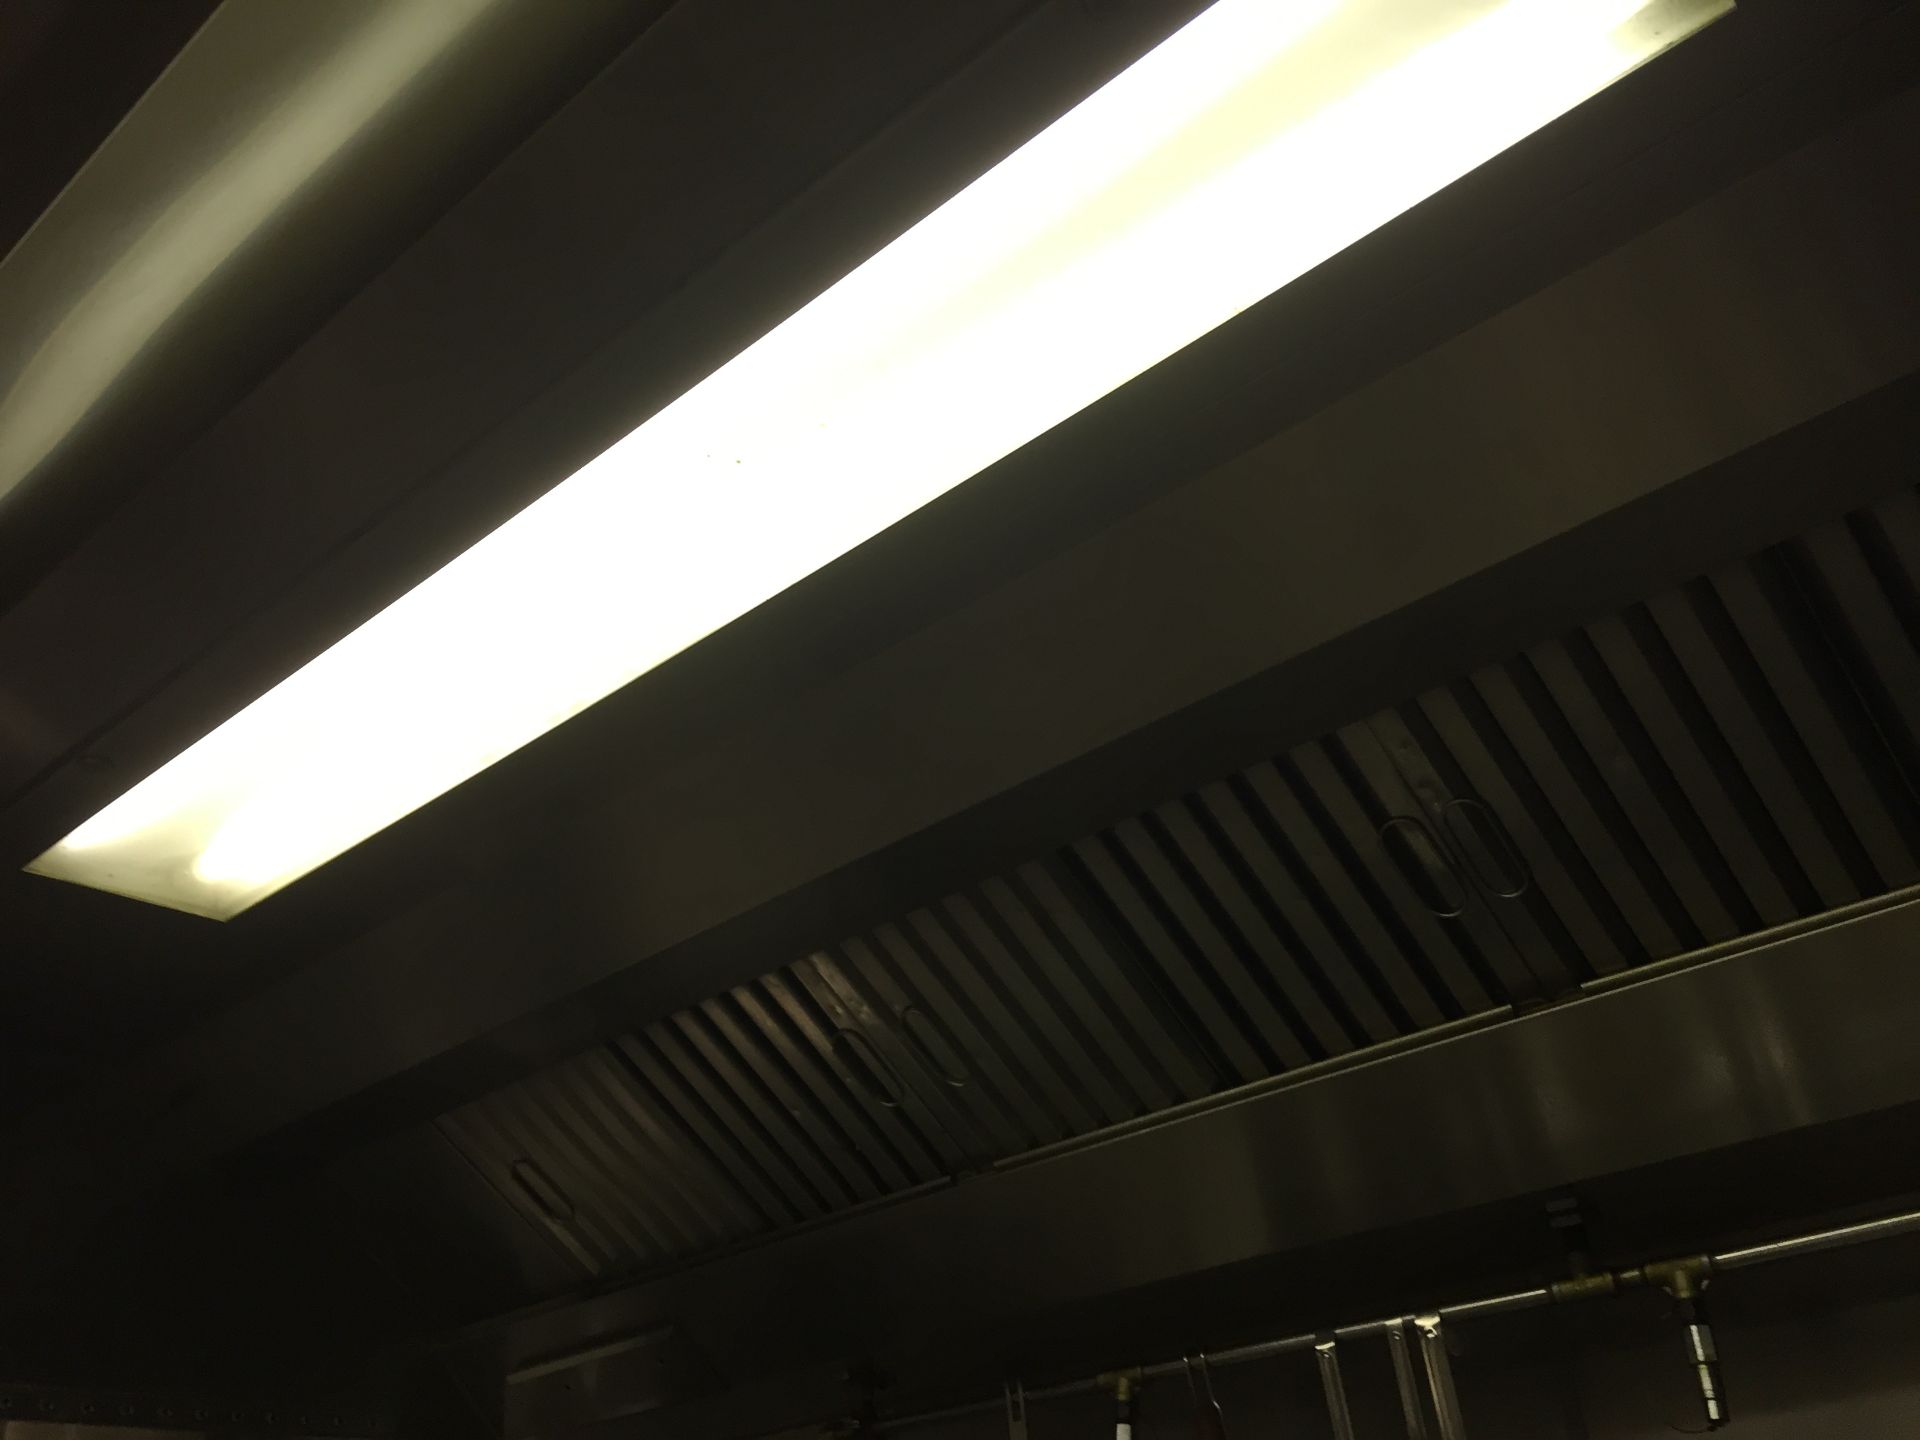 1 x Halton Stainless Steel Commercial Extractor Hood With Filters - Dimensions: 1248cm x 148cm x - Image 3 of 5